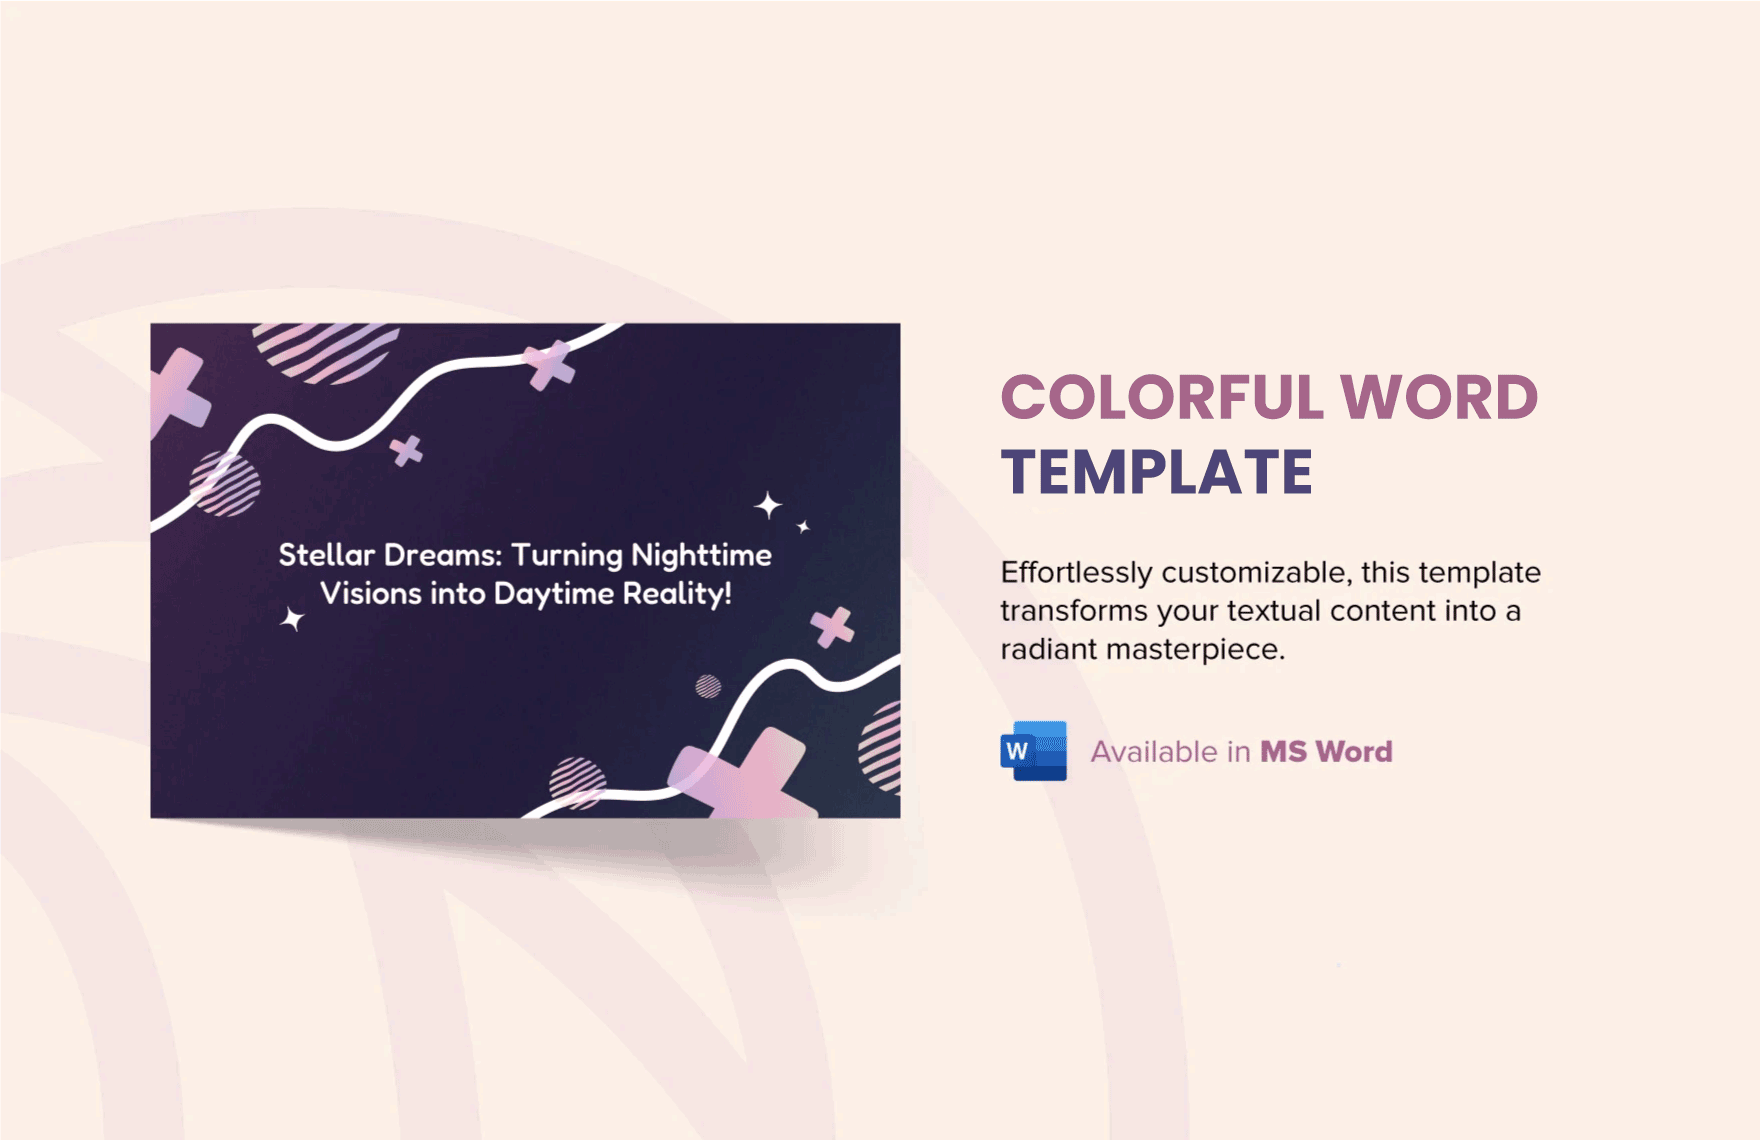 Colorful Word Template